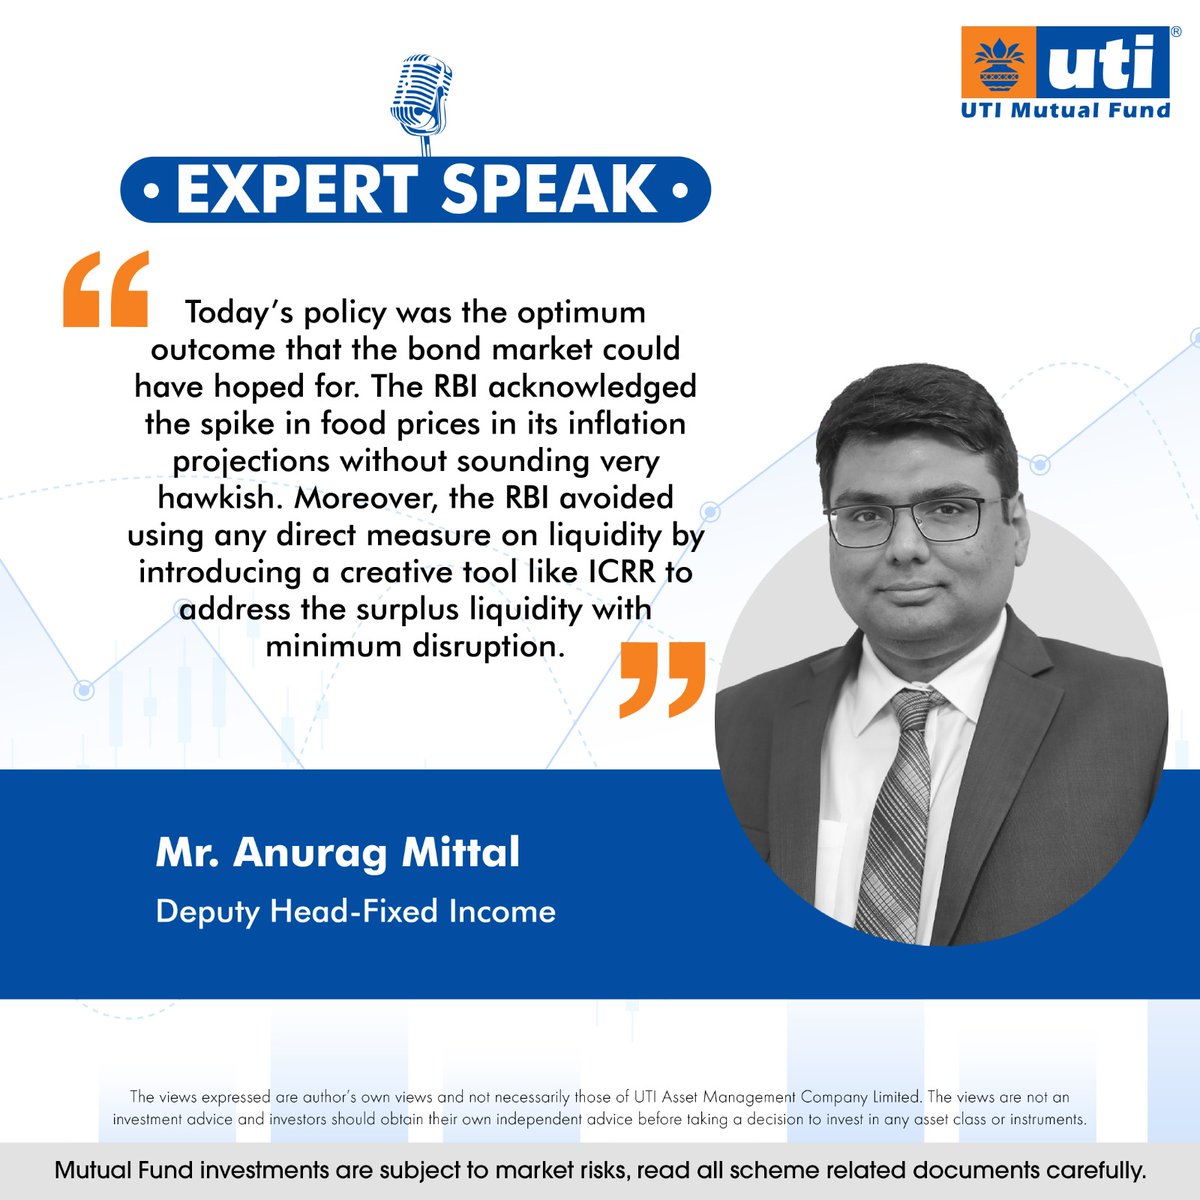 Mr. Anurag Mittal, Deputy Head - Fixed Income, shares his views on the RBI's Monetary Policy and outlook for the investors.
To read full article, click here: bit.ly/3QzYeqj

#ExpertSpeak #UTIMutualFund #RBI #MonetaryPolicy #RepoRate